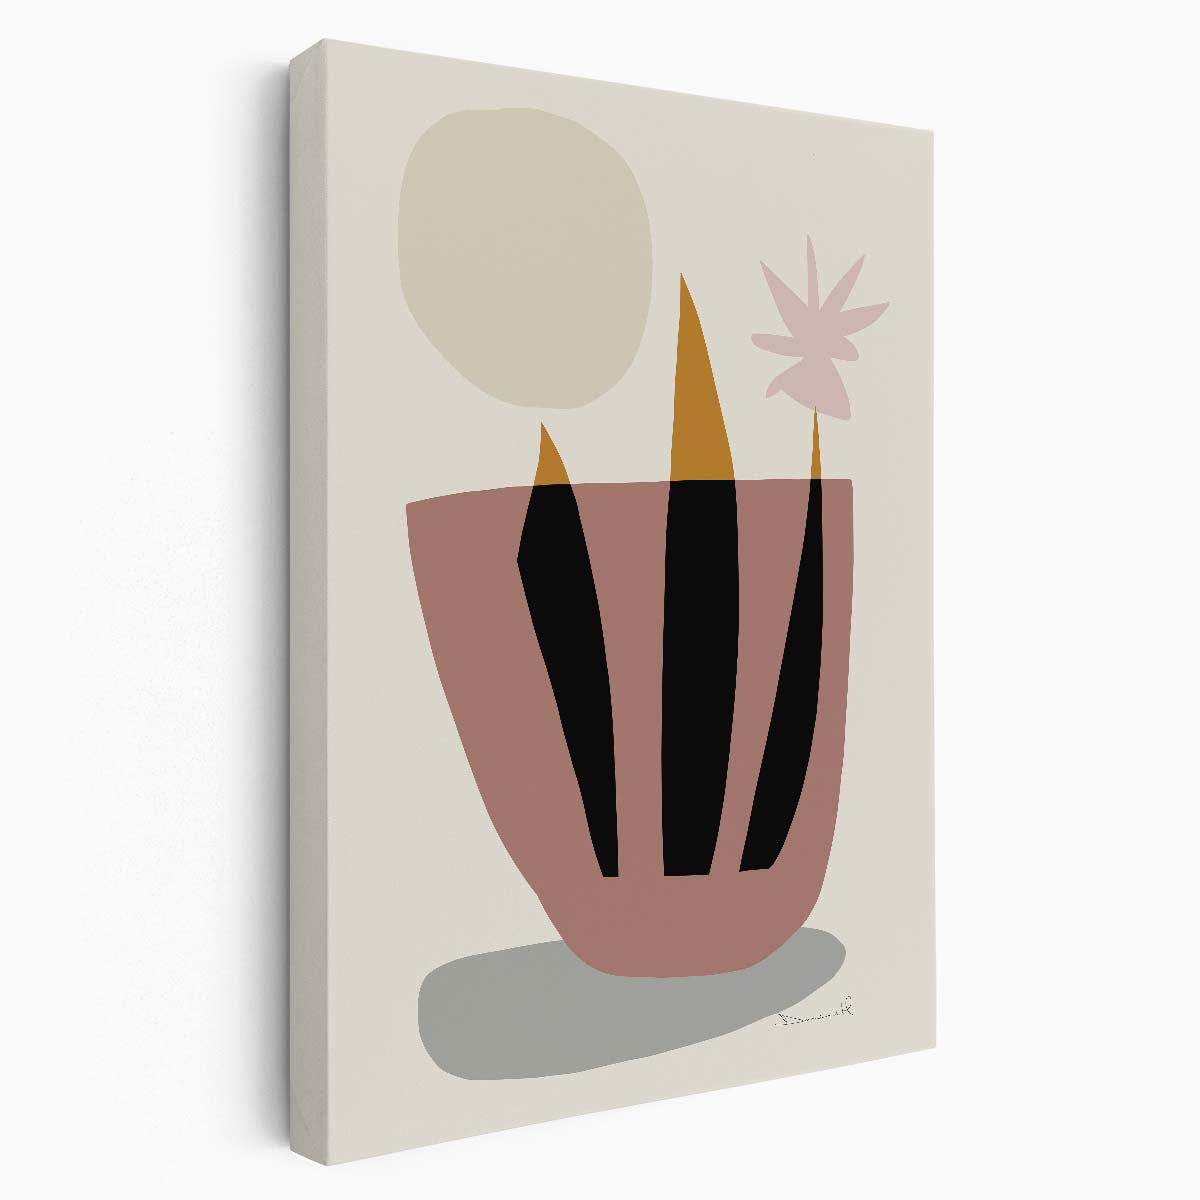 Dan Hobday's Modern Minimalistic Botanical Illustration on White Background by Luxuriance Designs, made in USA